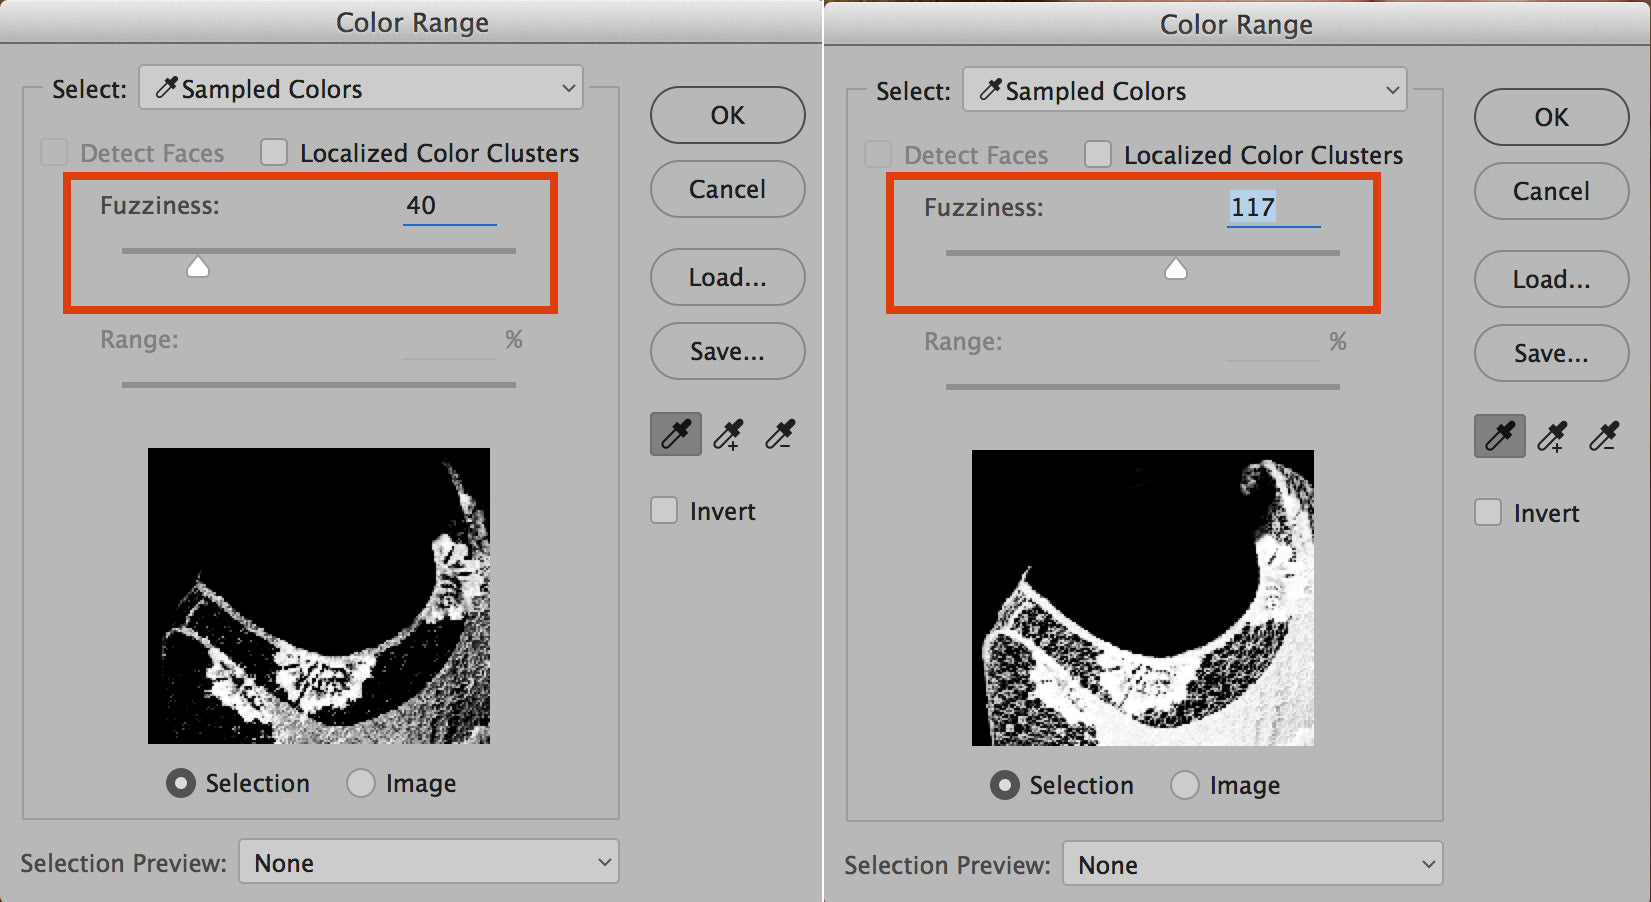 Fuzziness option in the Color Range tool